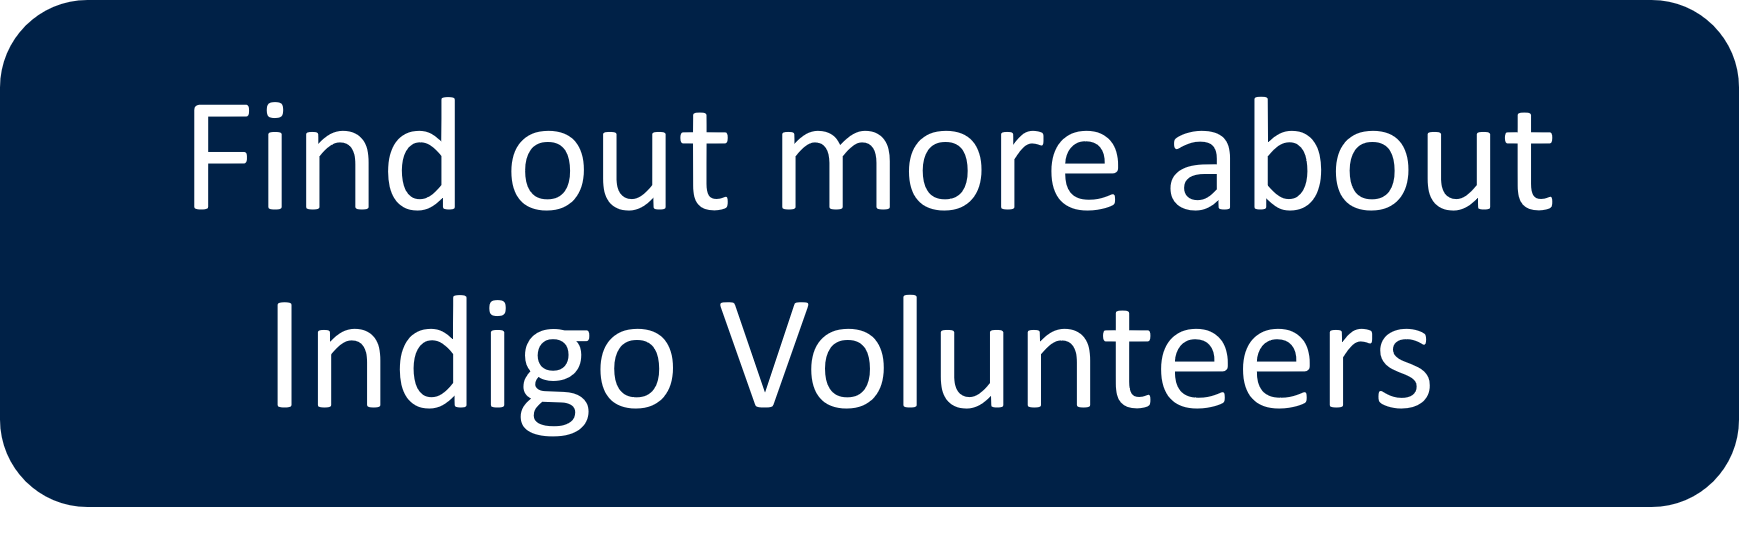 Find out more about Indigo Volunteers